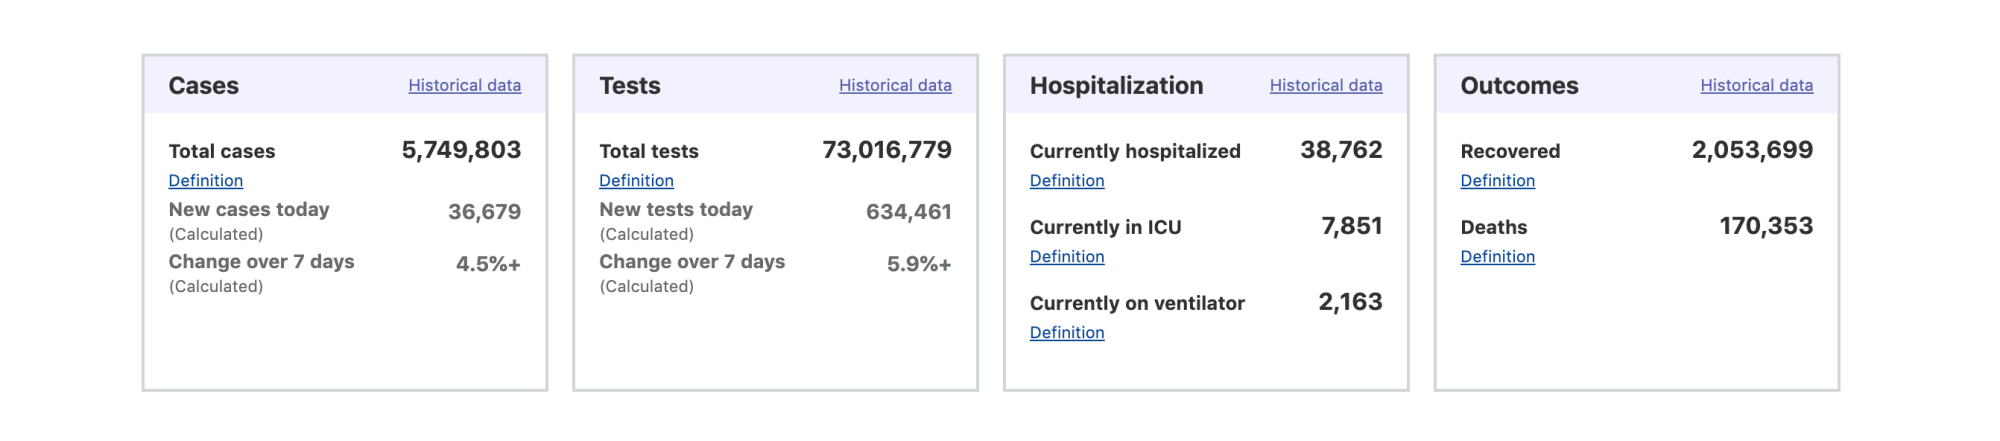 A screenshot of our national data page showing four data-display cards: Cases, which includes data on  total cases, new cases today, and change over 7 days; Tests, which includes data on total tests, new tests today, and change over 7 days; Hospitalization, which includes data on currently hospitalized, currently in ICU, and currently on ventilator; and Outcomes, which includes data on recovered cases and deaths. 